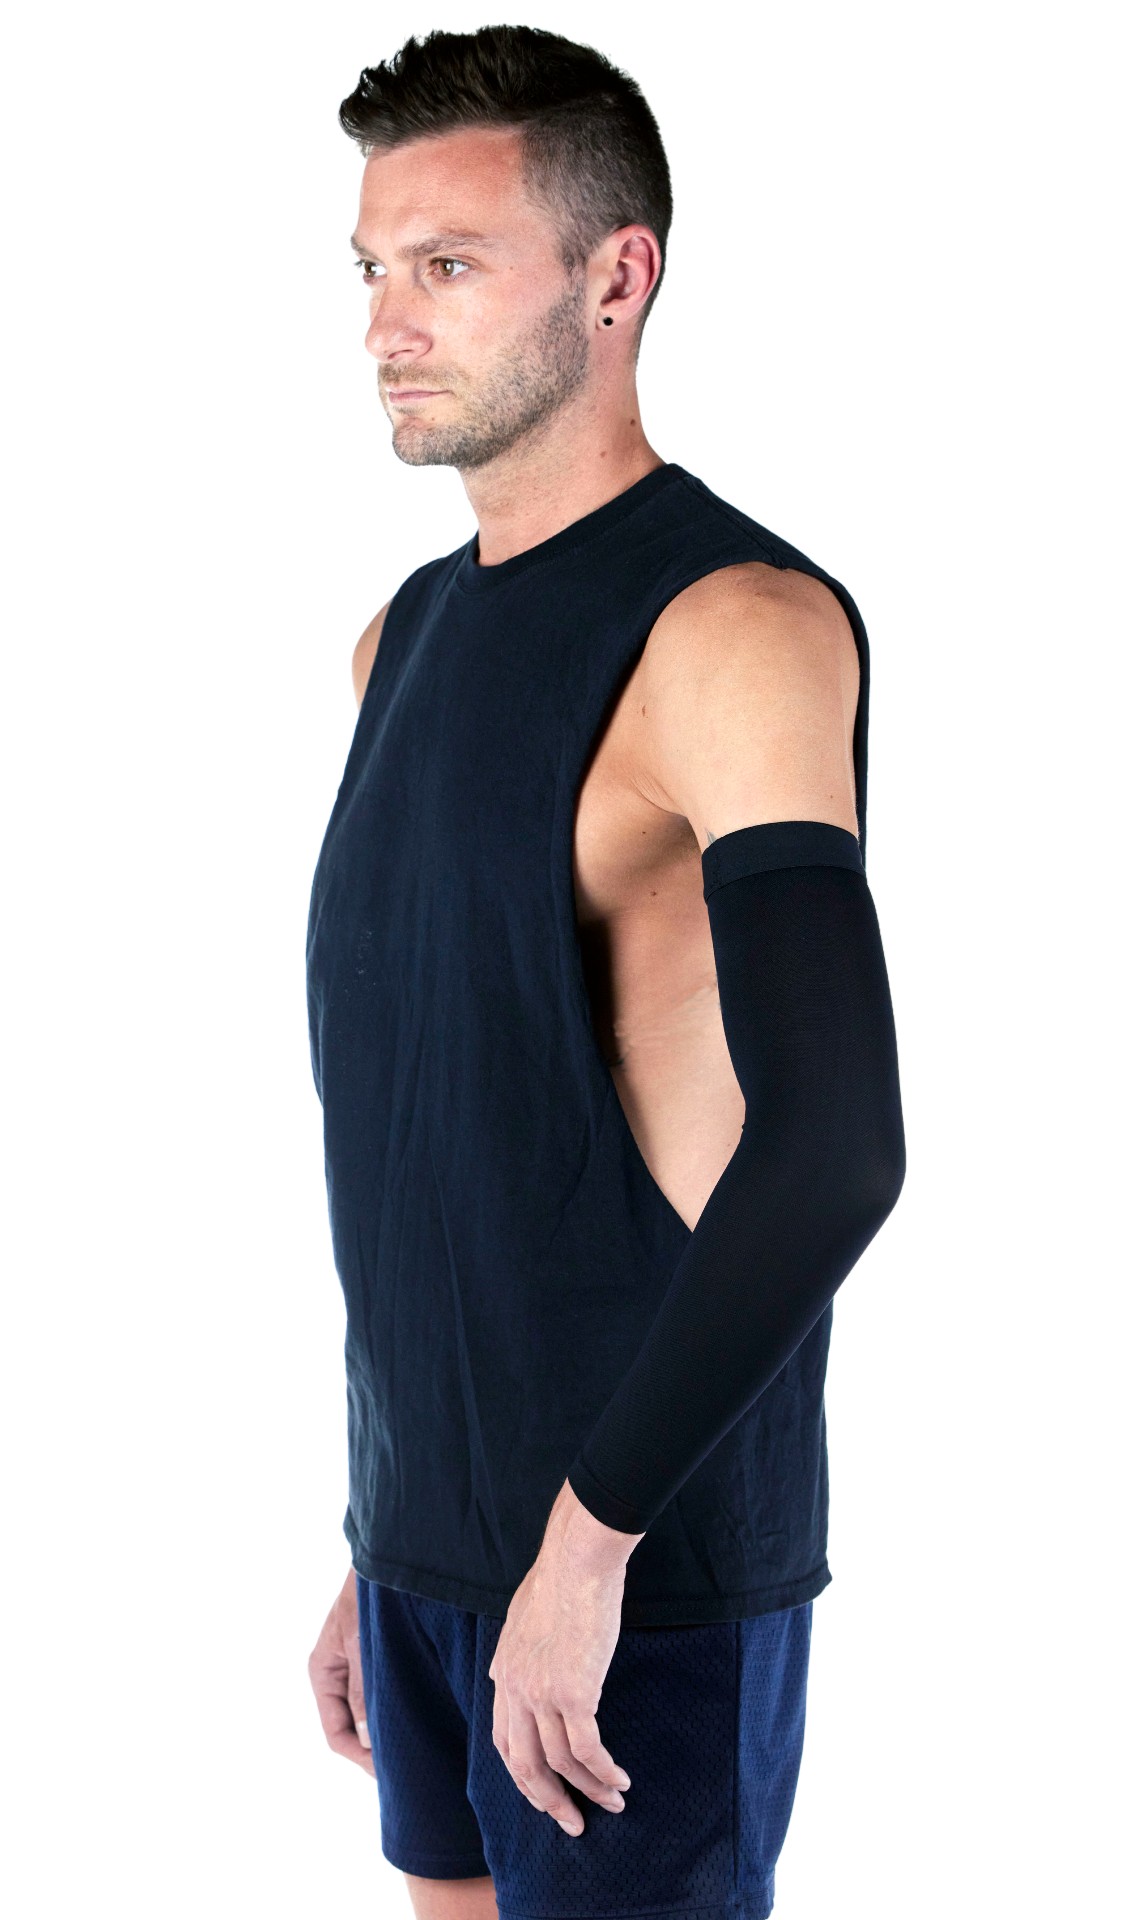  Graduated Compression Arm Sleeves For Men Women - Medical  Grade 20-30mmHG - Lymphedema Sleeve